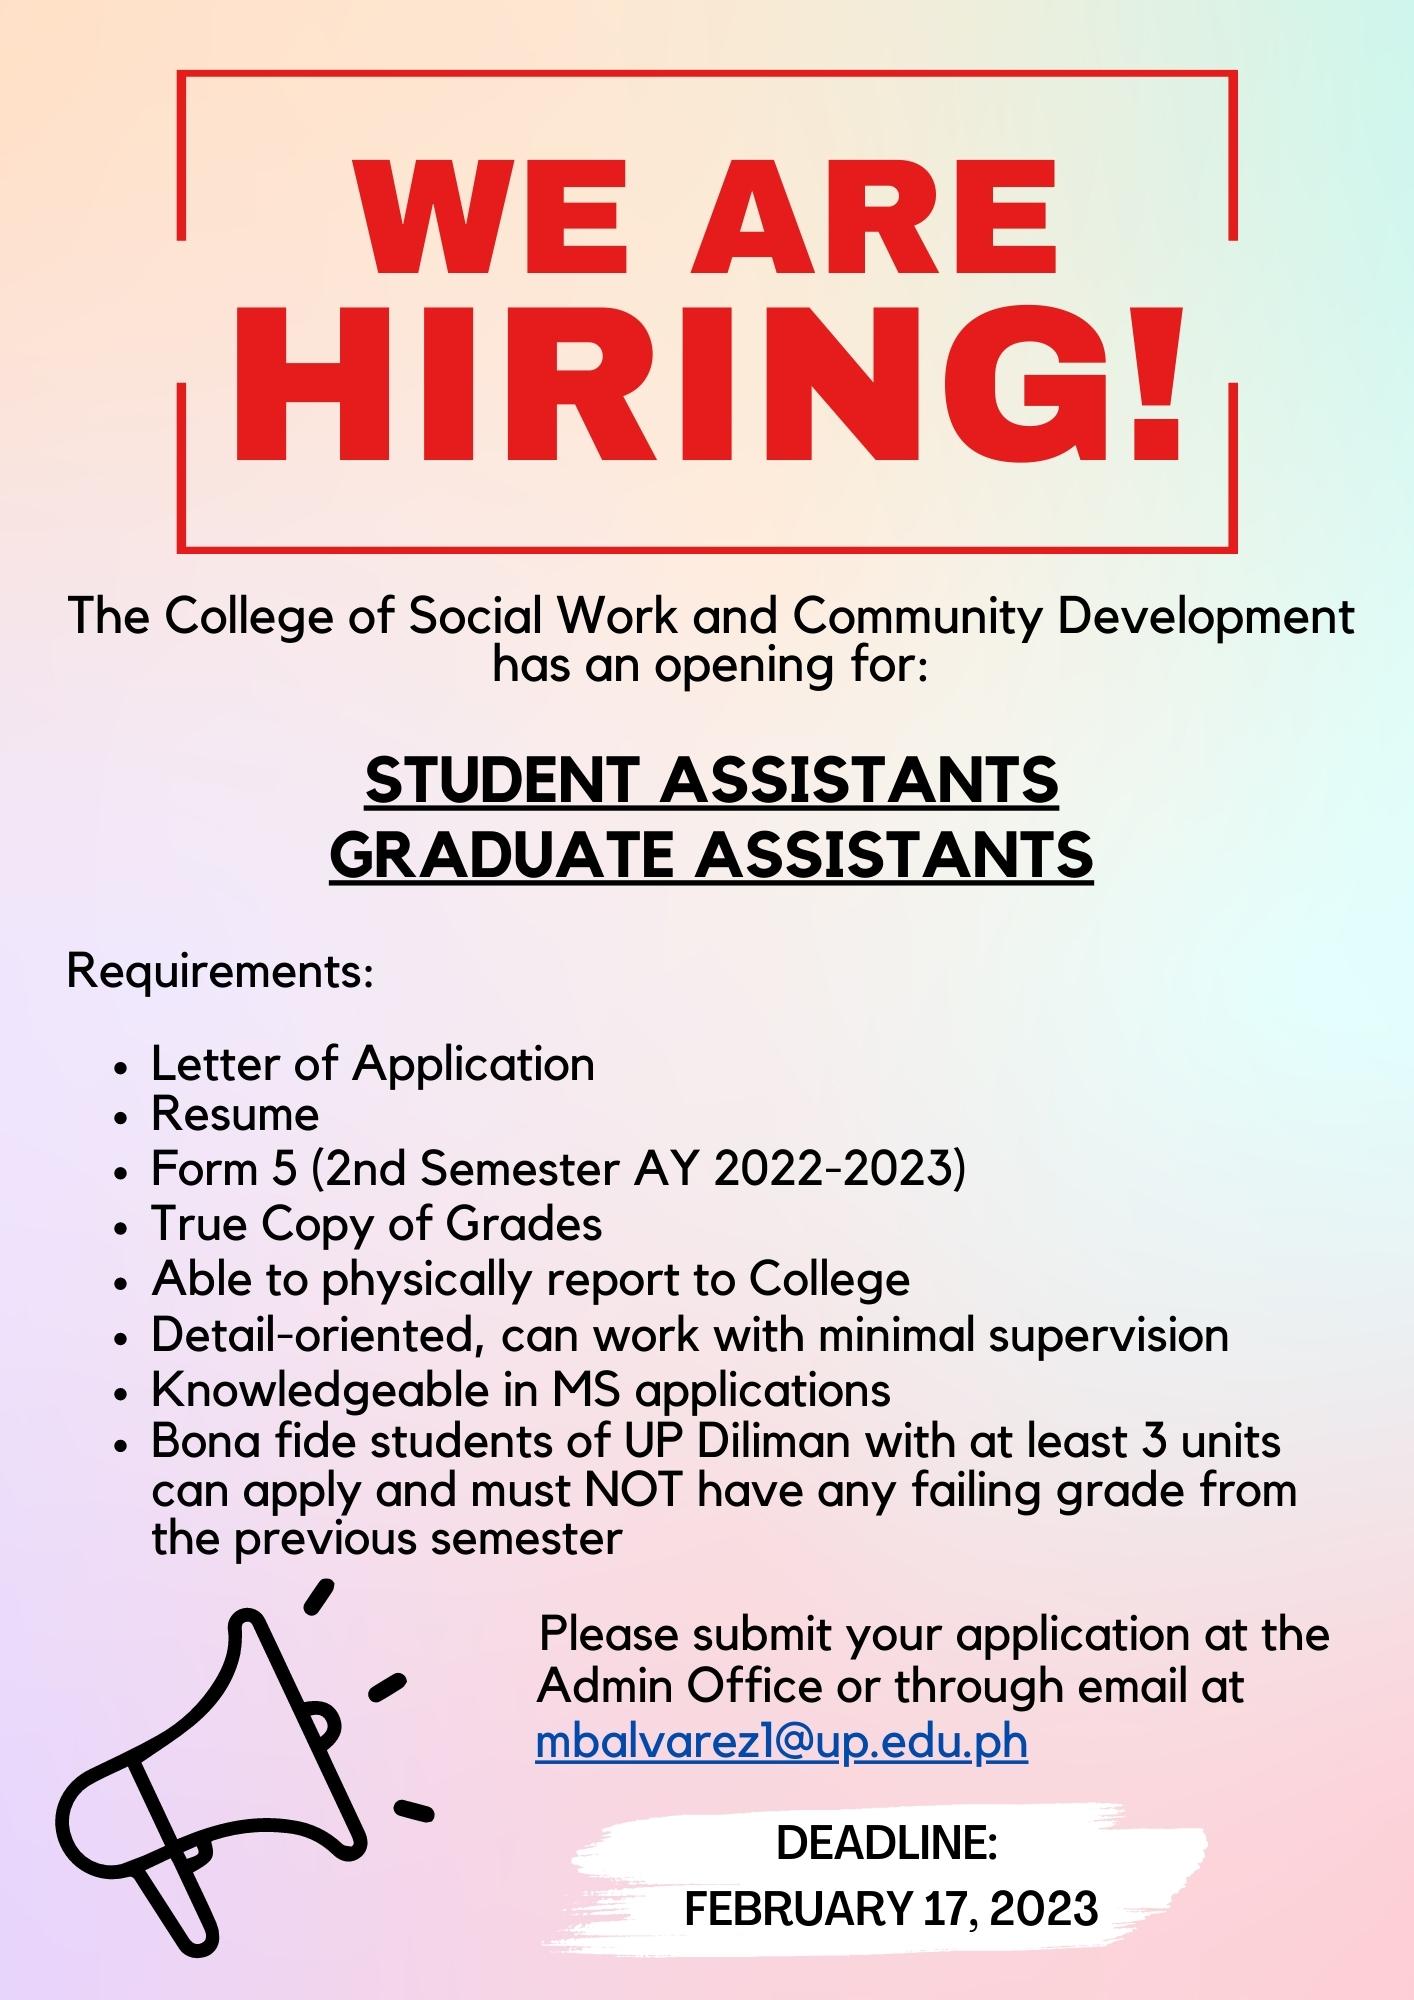 Call for Applications for Student Assistants and Graduate Assistants